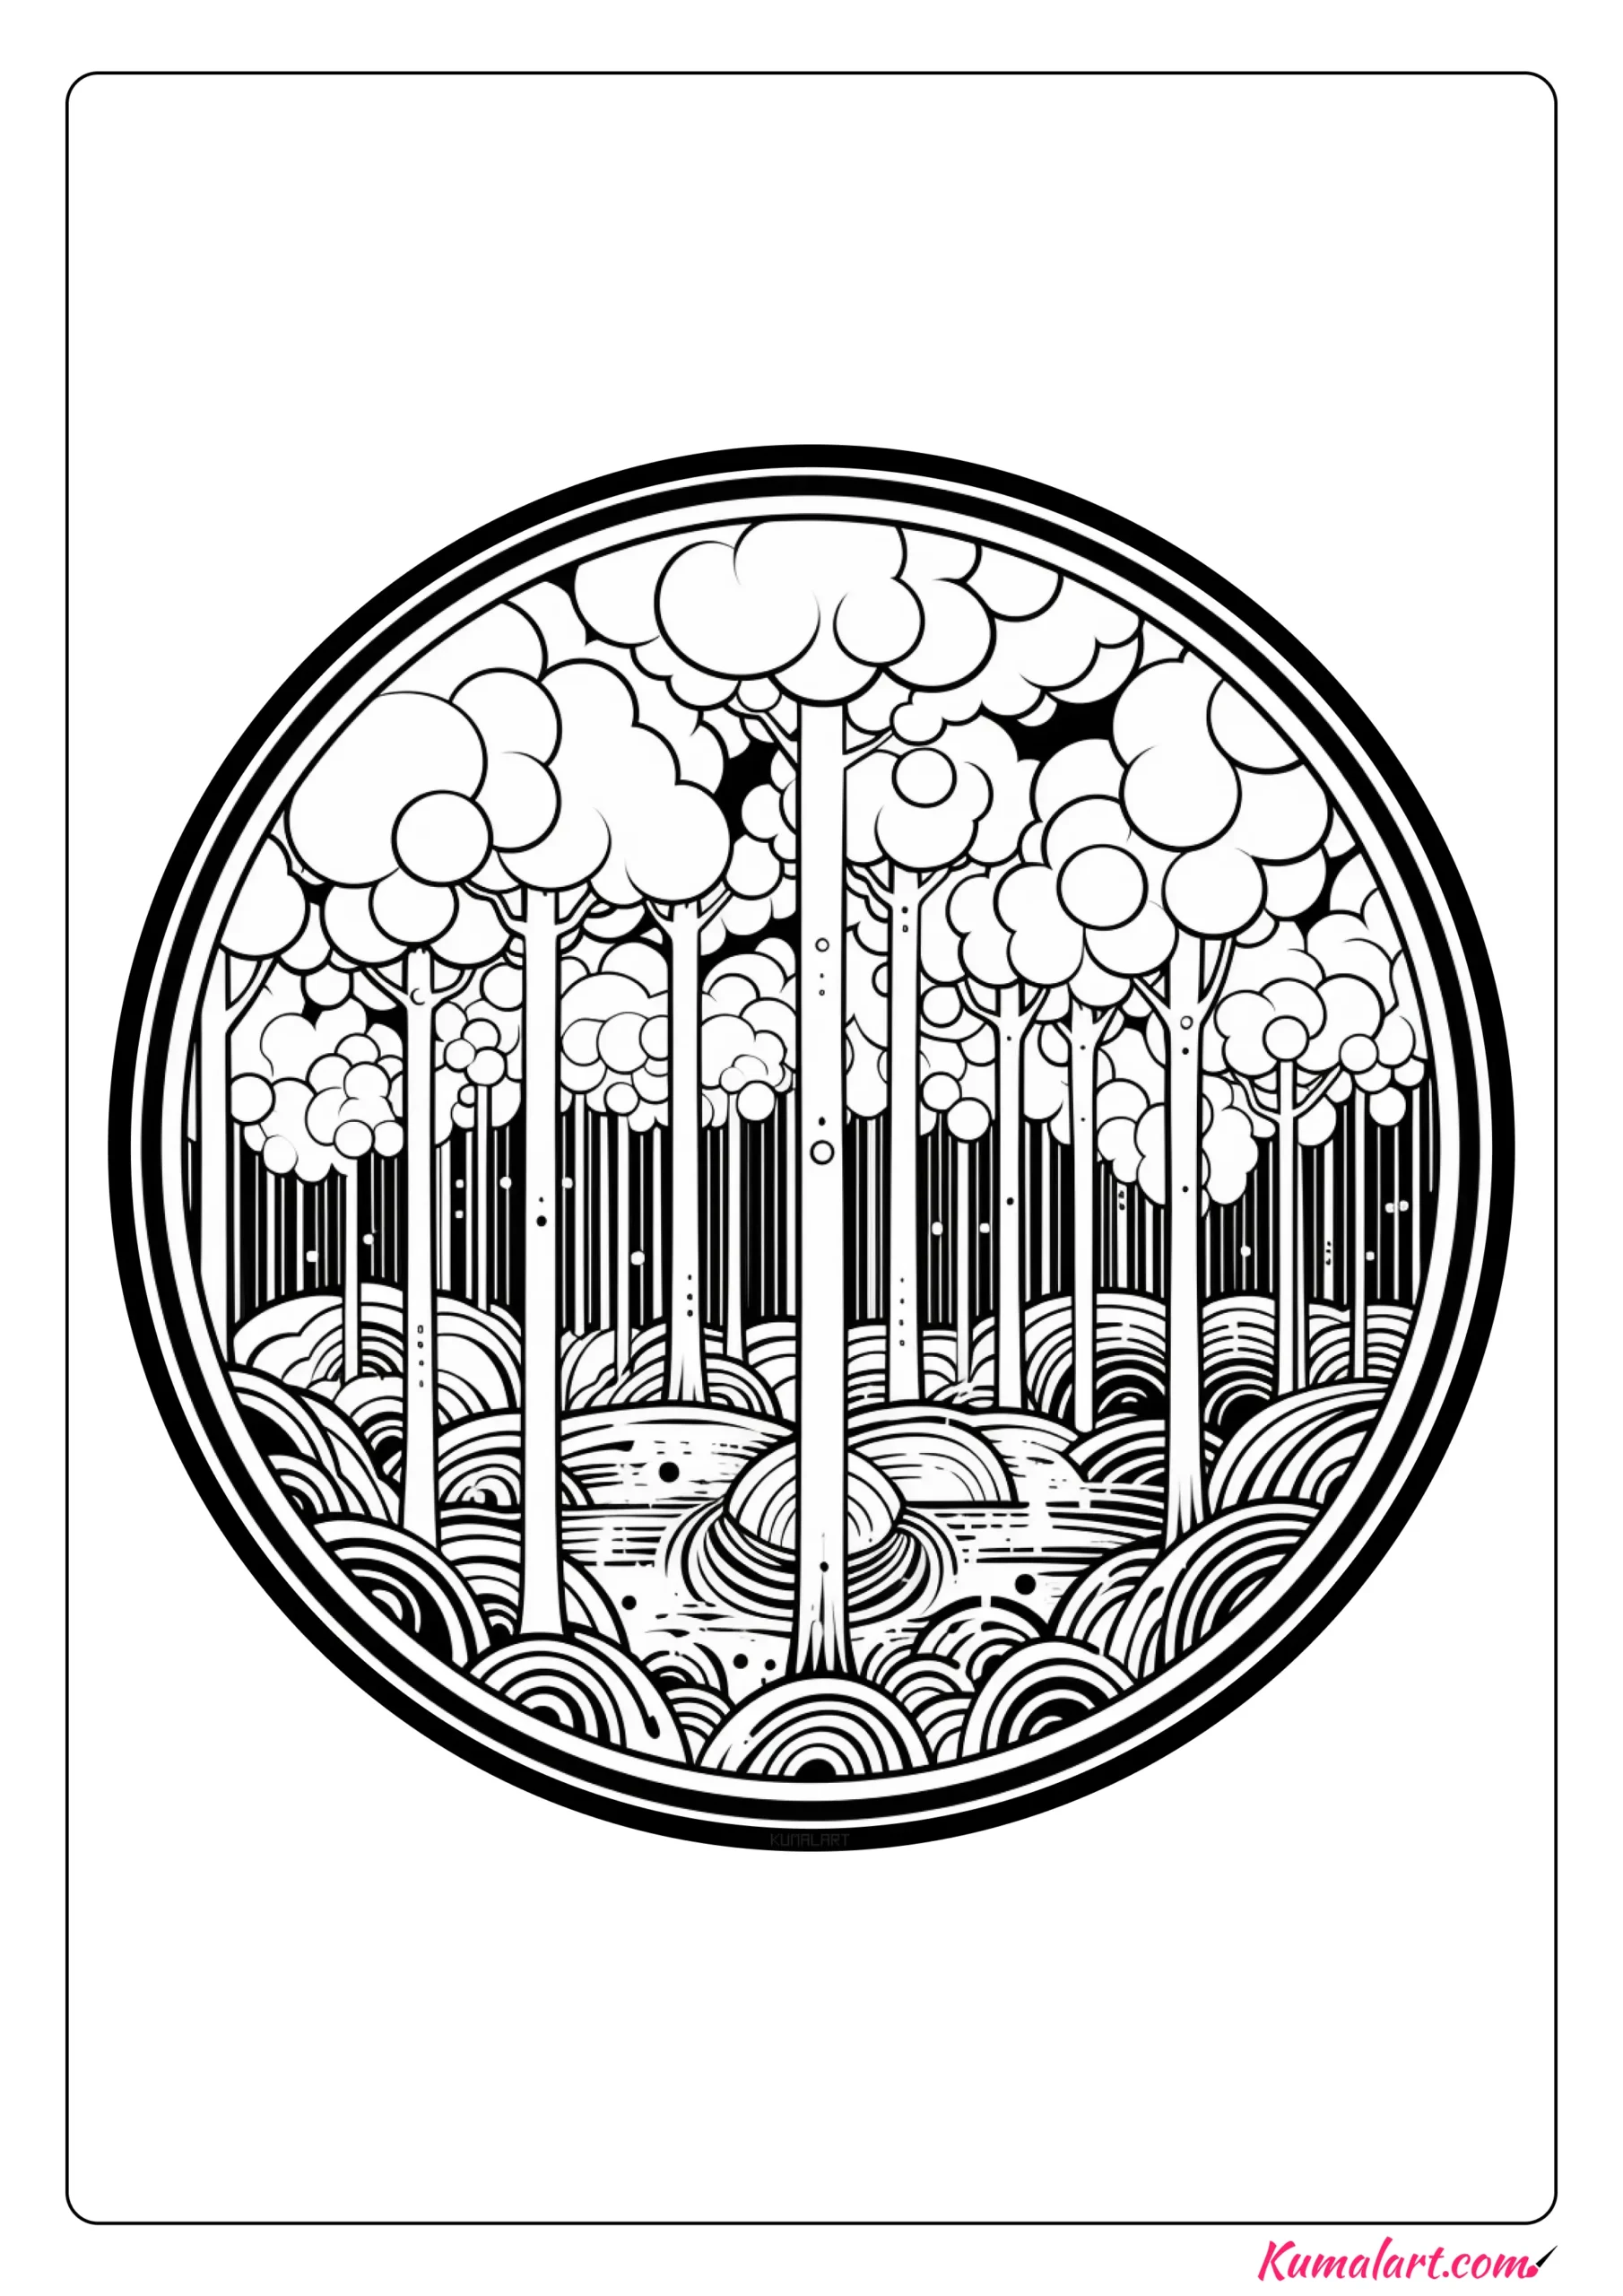 Spectacular Rainforest Coloring Page